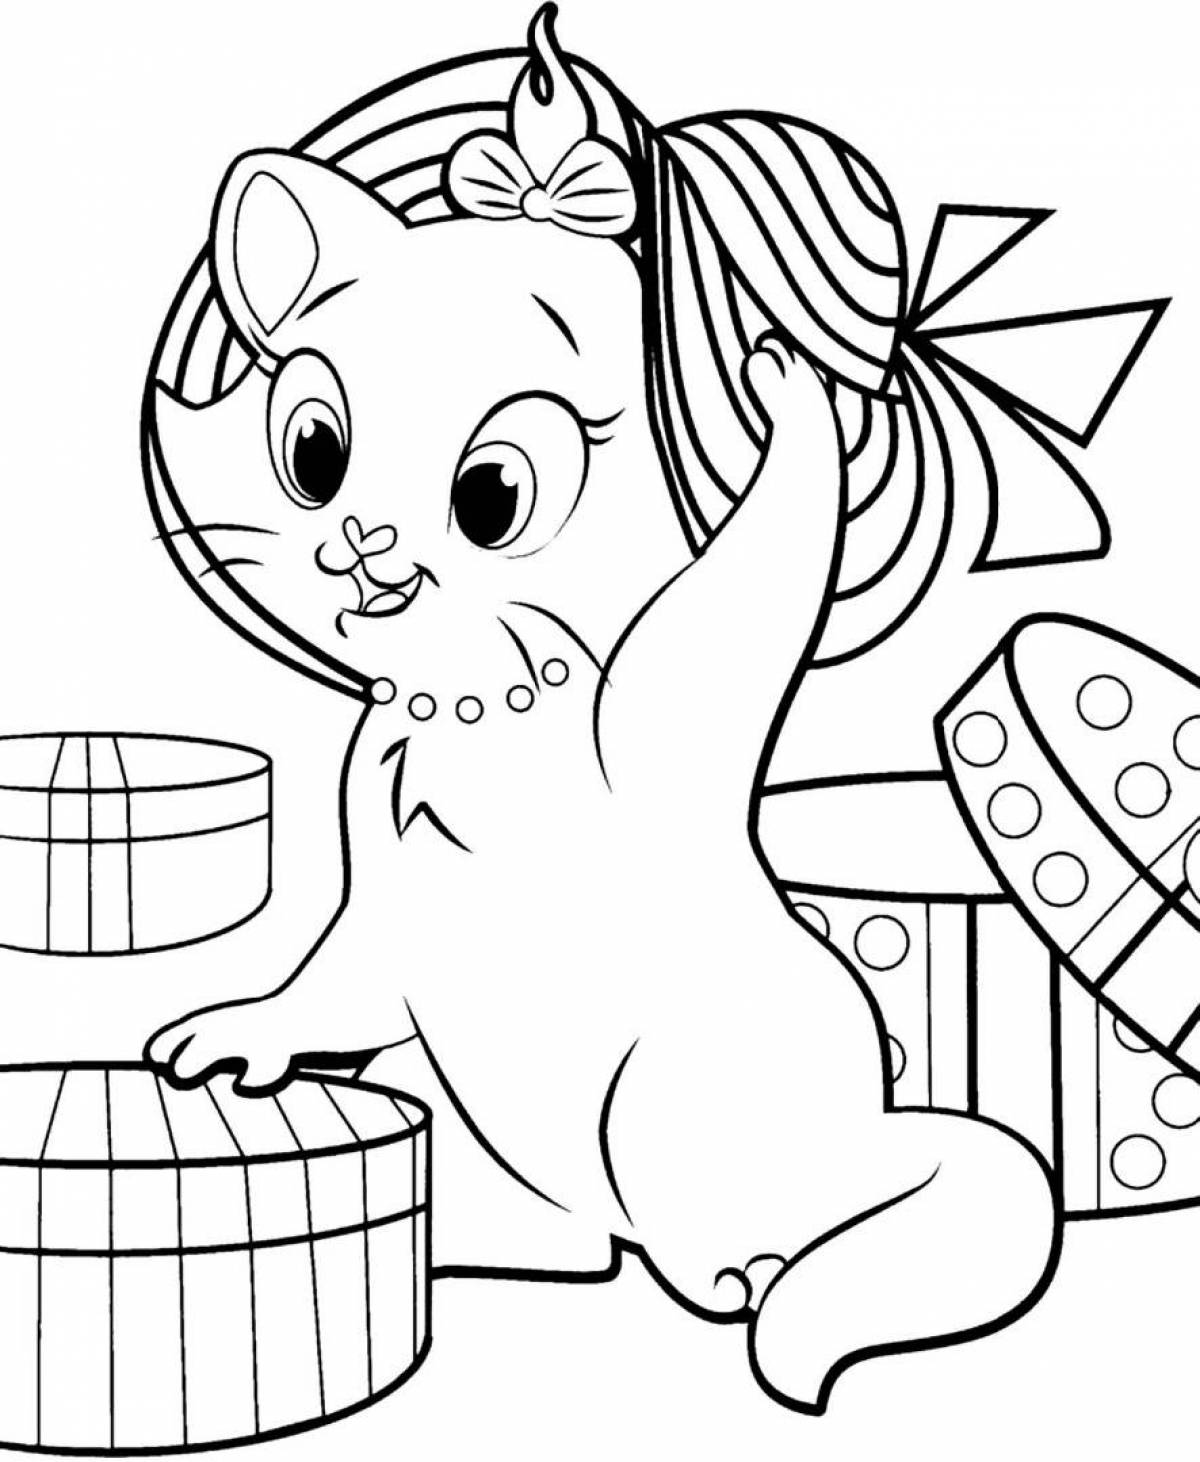 Furry kitty coloring book